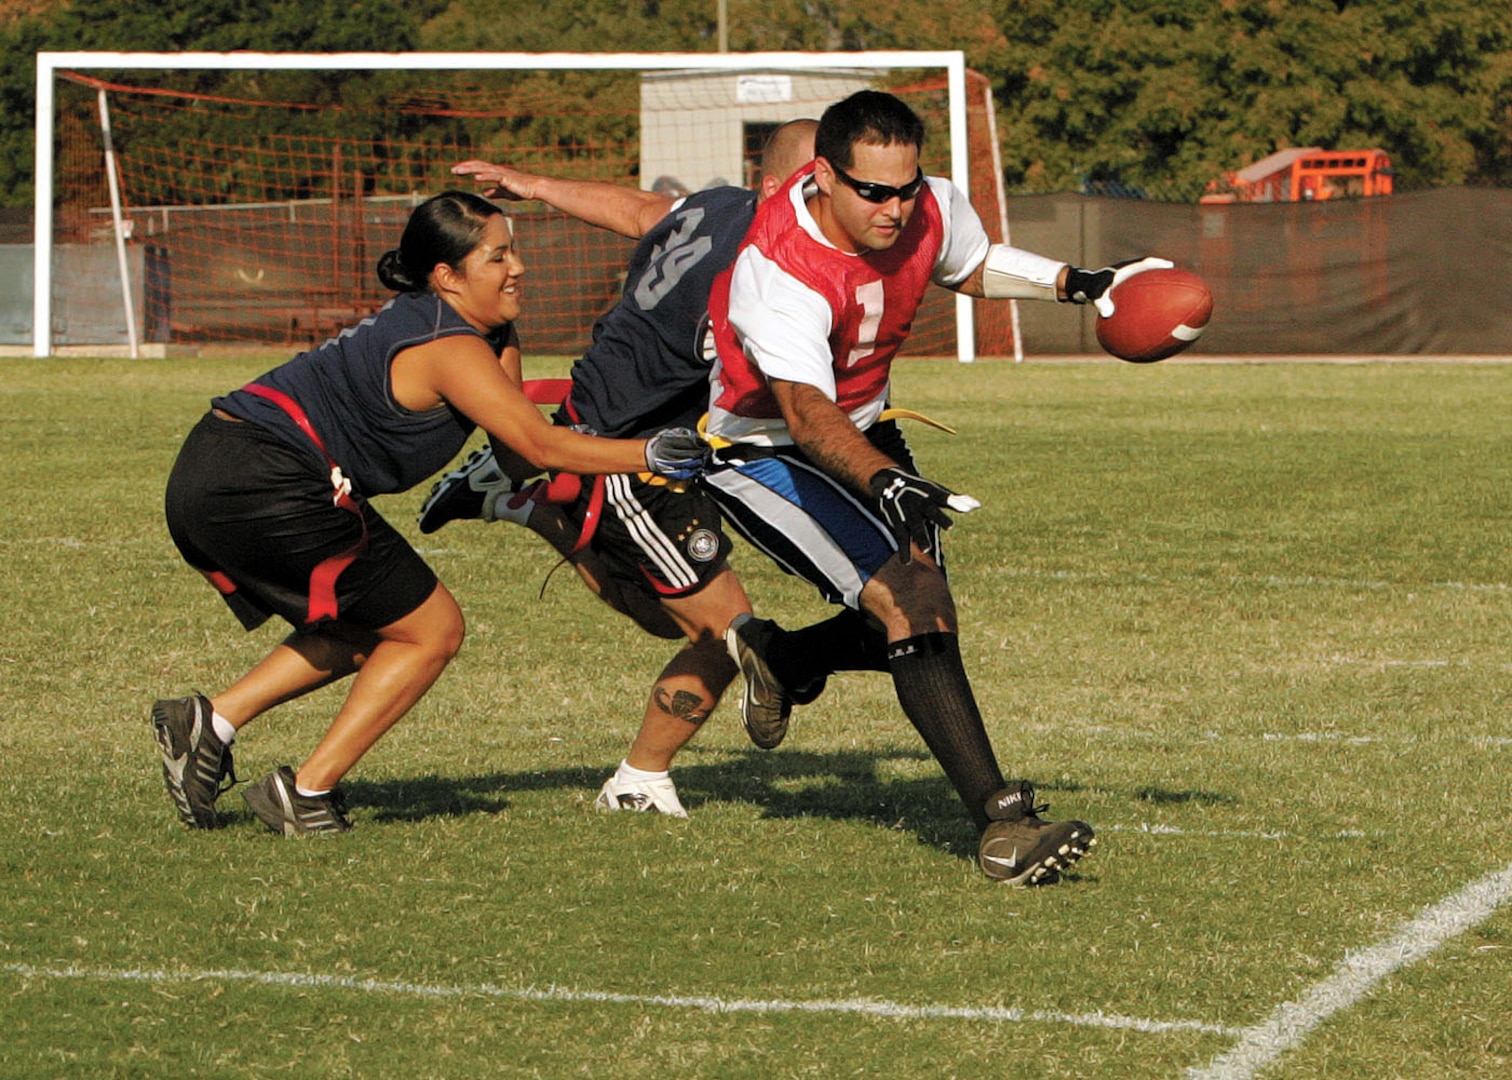 37th Training Support Squadron quarterback Jaime Rivera battles through Defense Language Institute defenders to get his team in position for a touchdown. (U.S. Air Force photo/Robbin Cresswell)